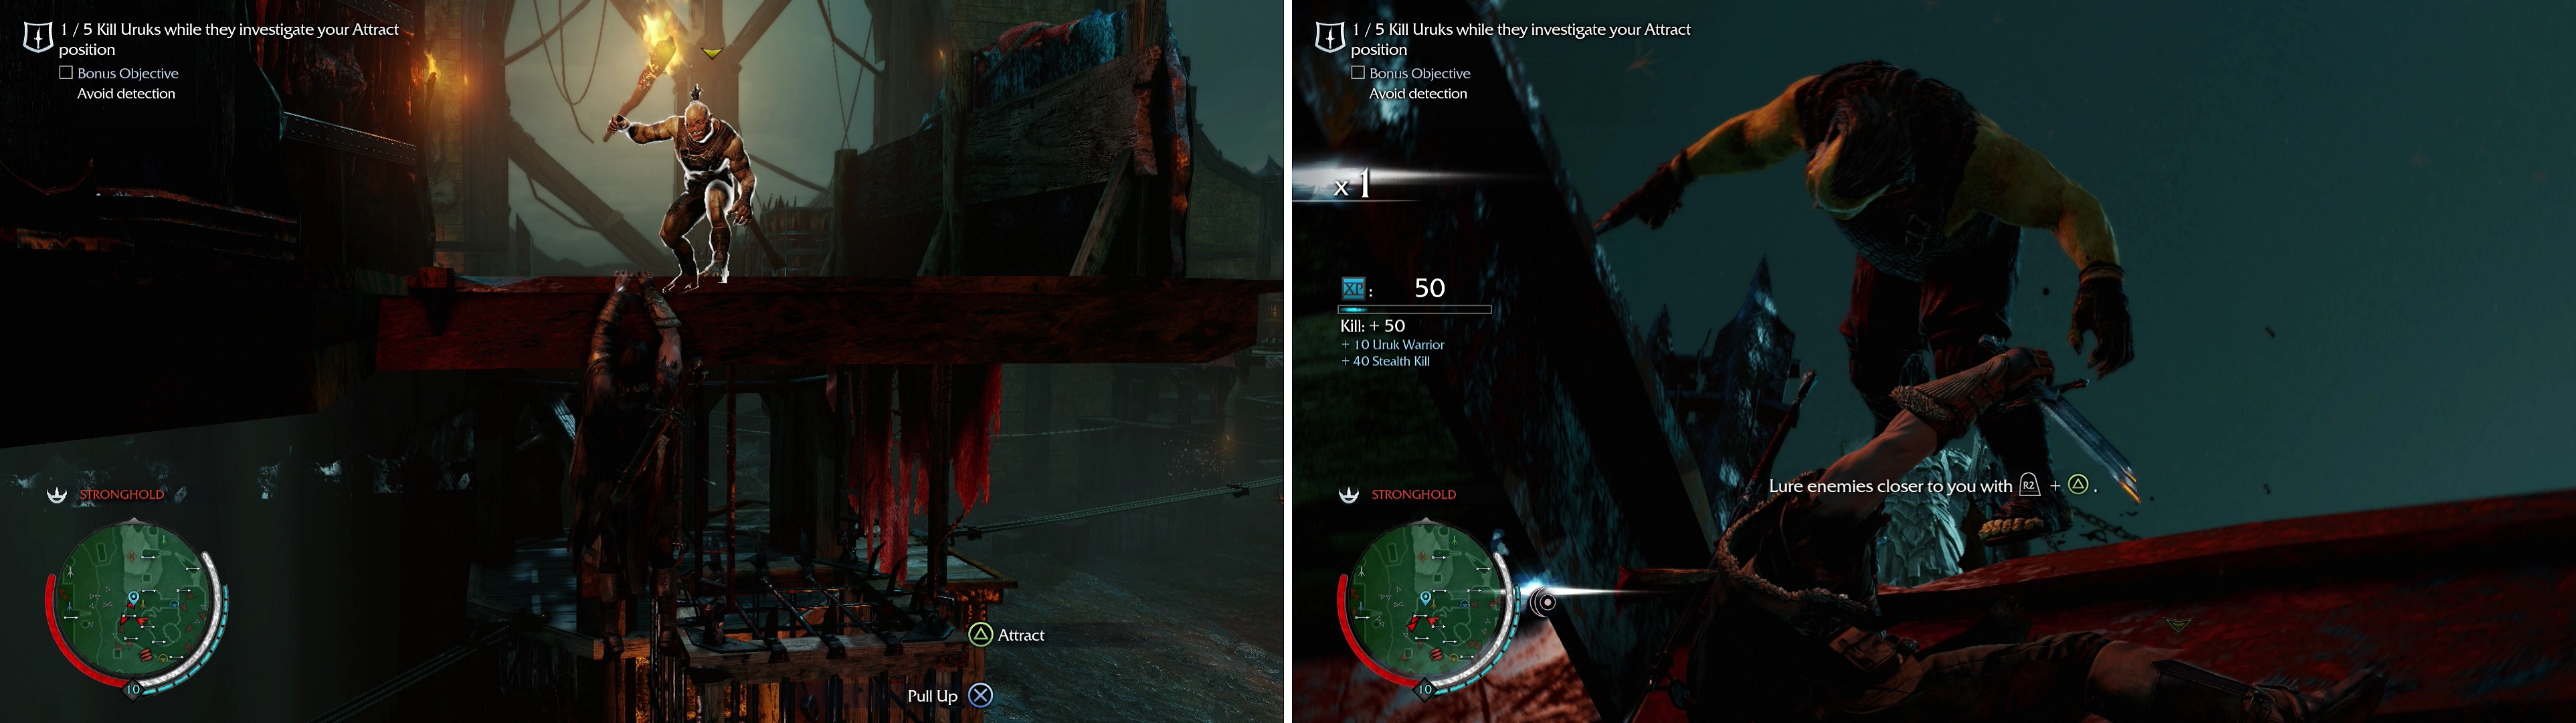 Use the “Attract” ability to lure Uruks to you (left) then perform a Ledge Kill (right).